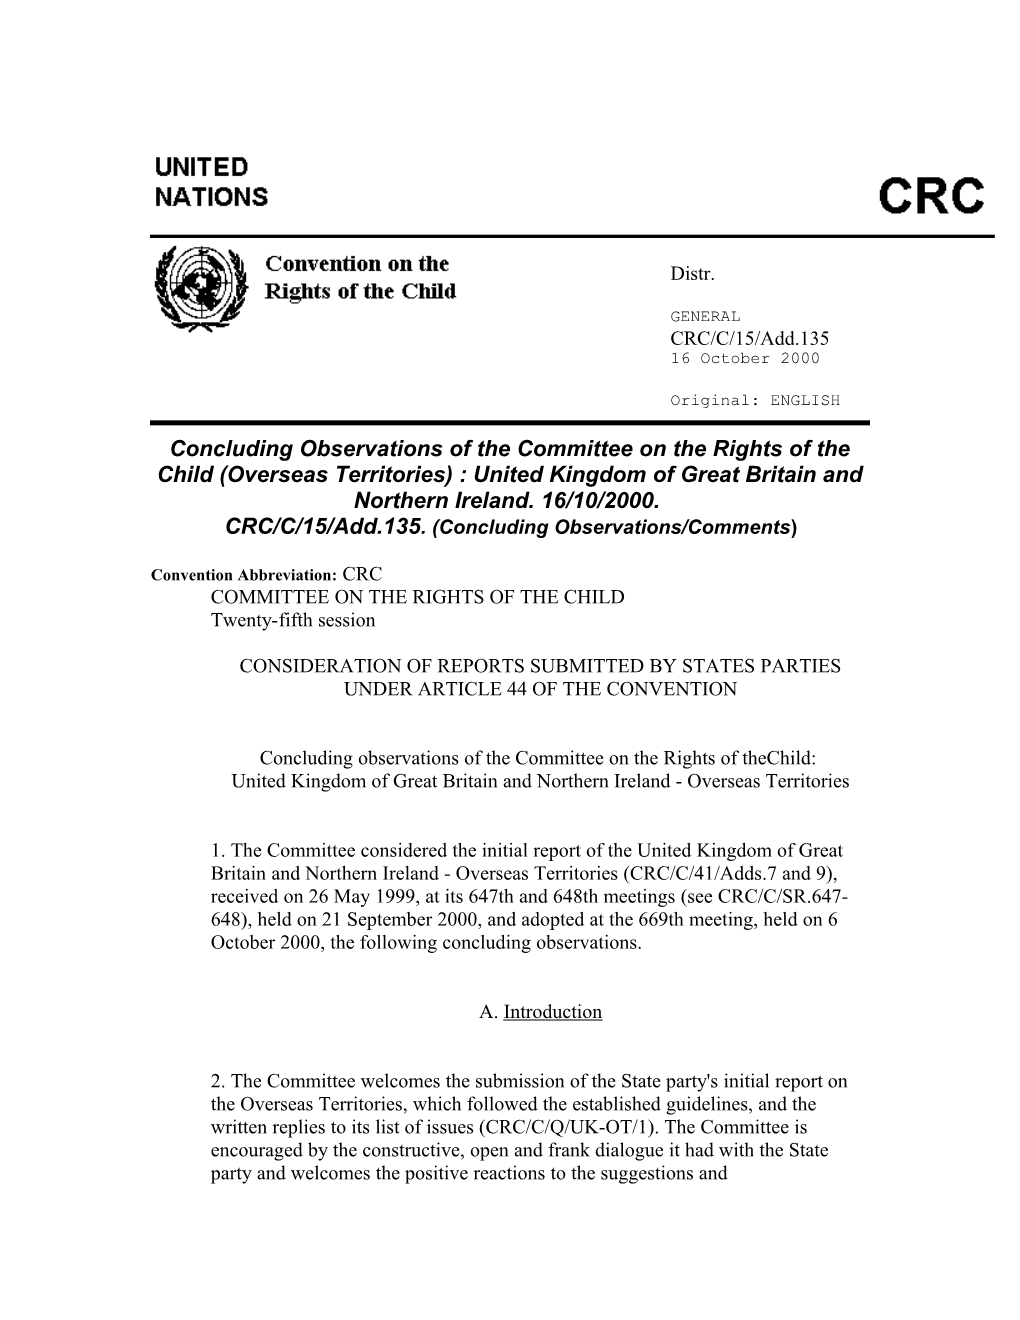 Concluding Observations of the Committee on the Rights of the Child (Overseas Territories)